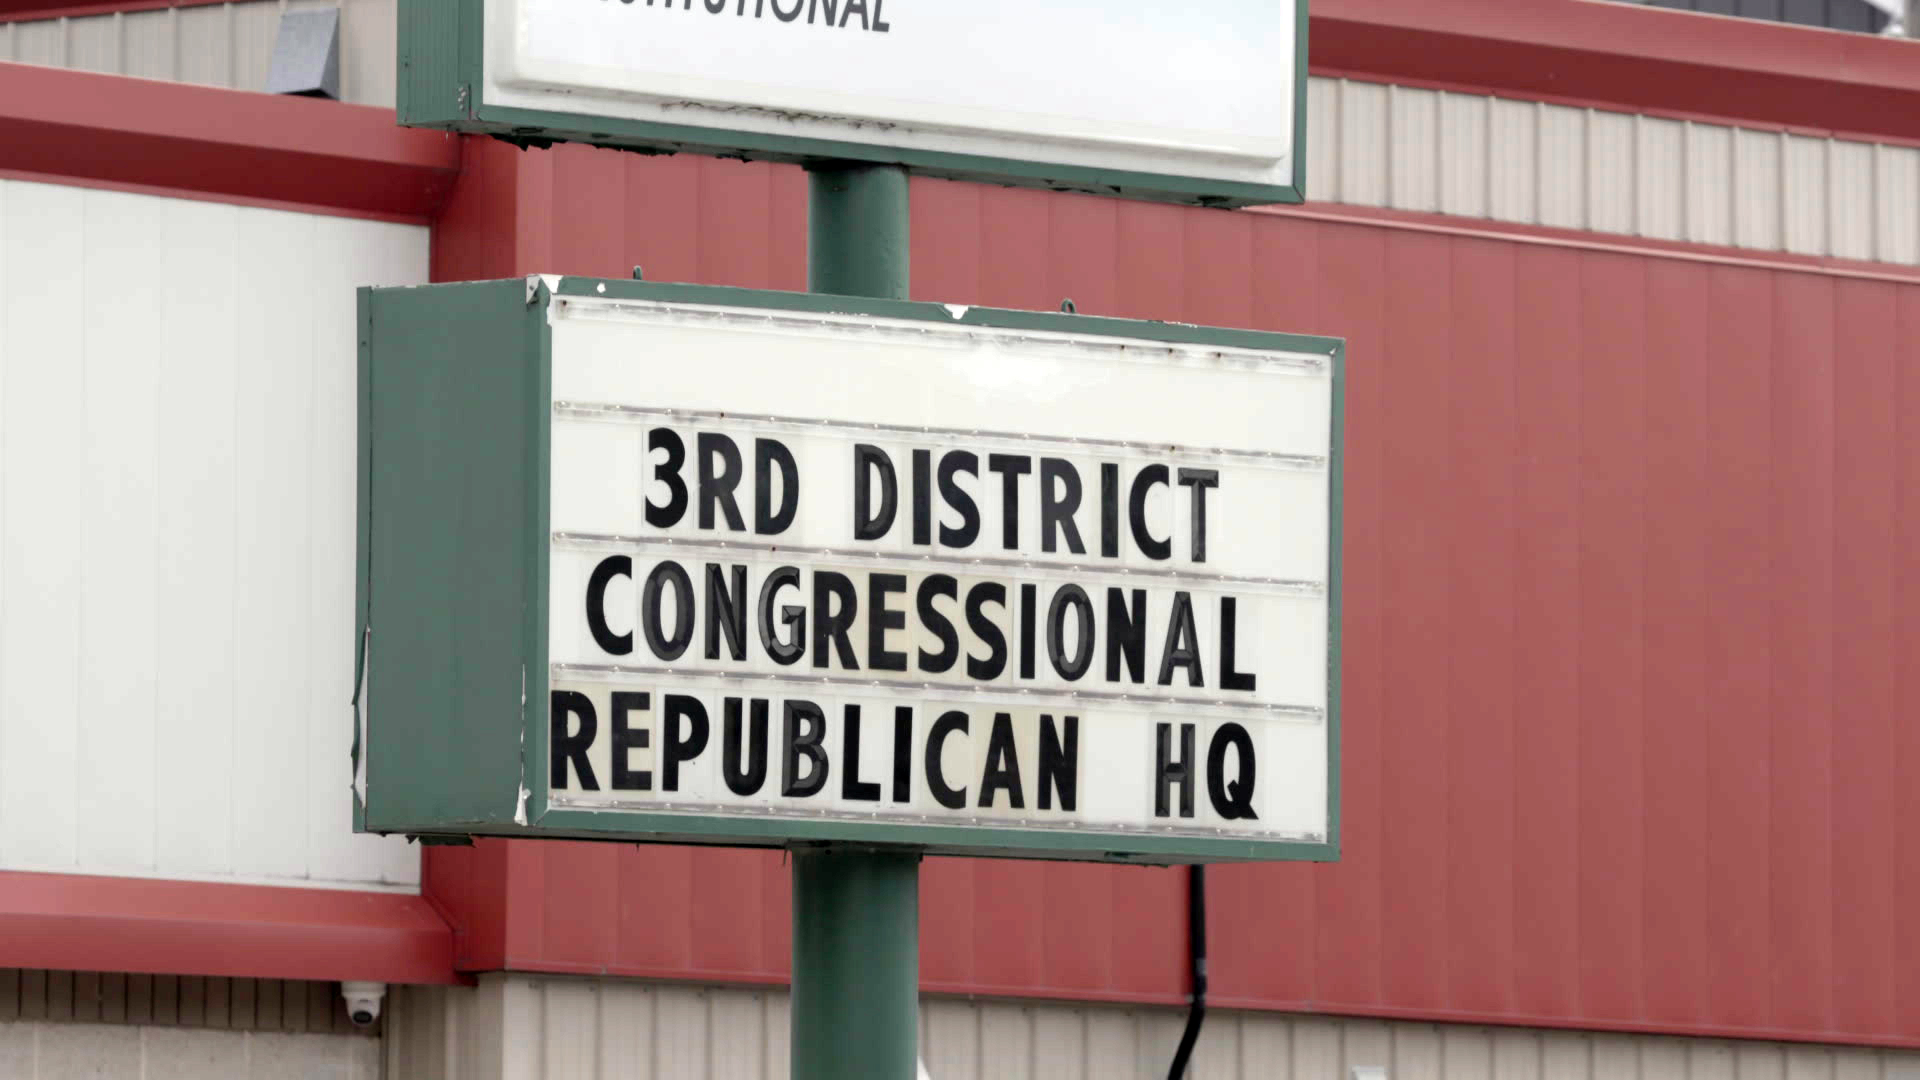 An outdoor changeable letter sign reads "3rd District Congressional Republican HQ" with a painted corrugated metal wall in the background.